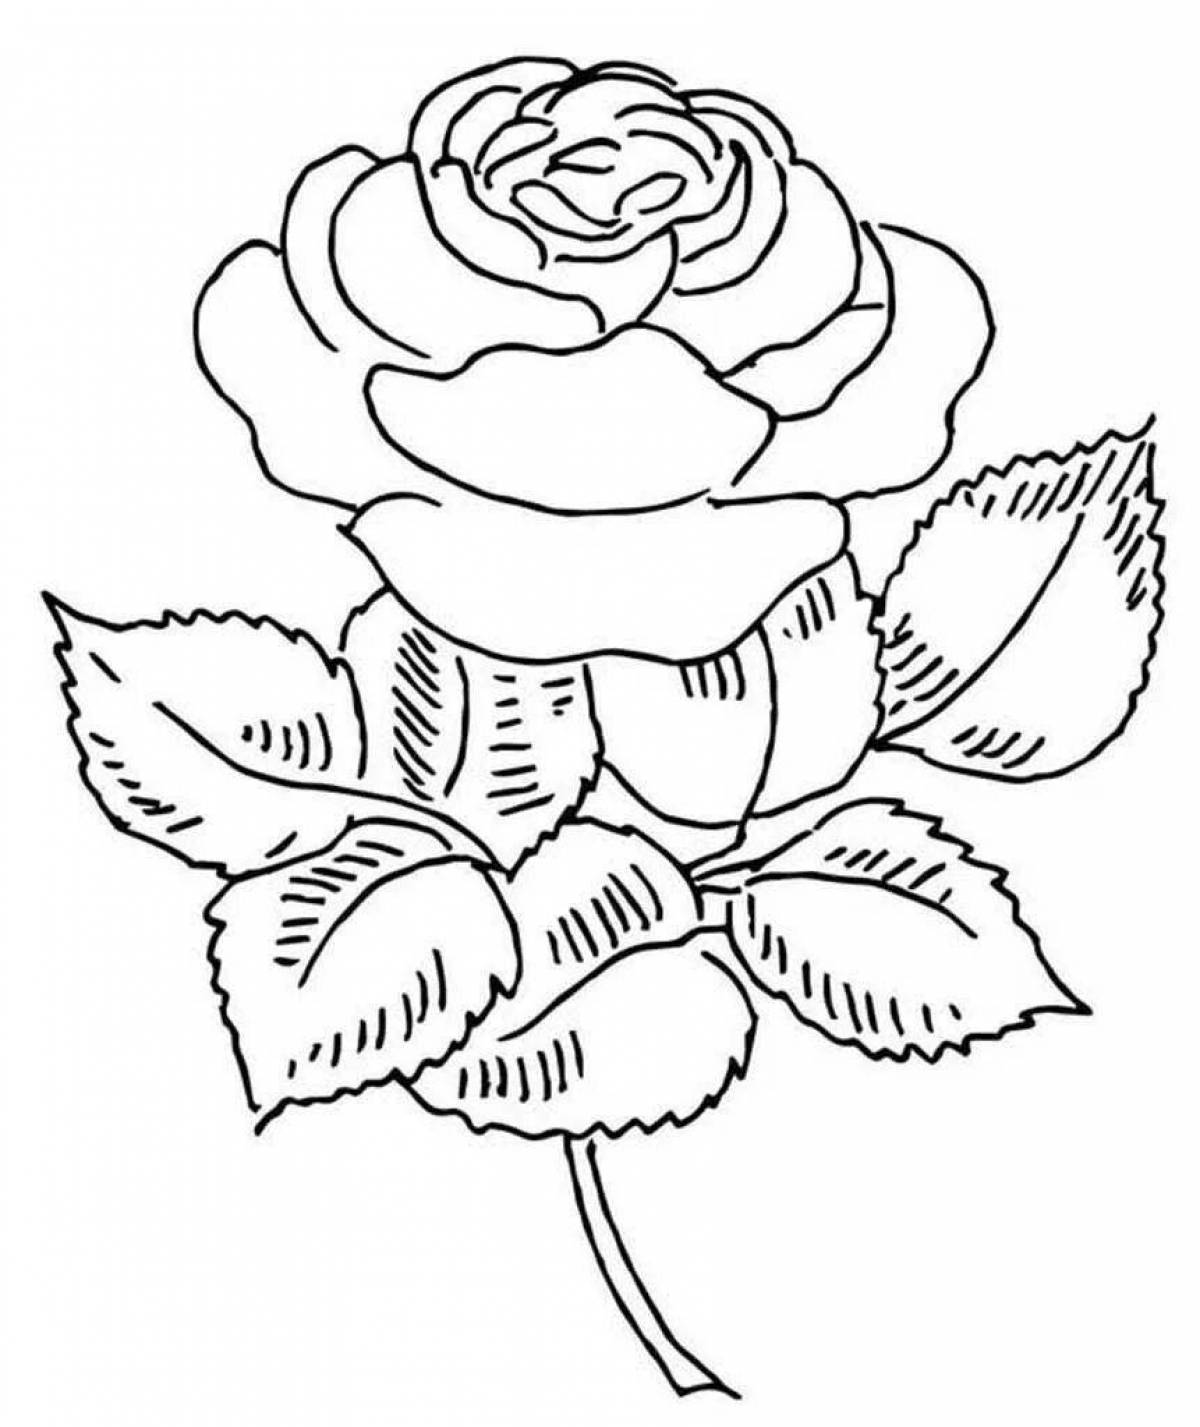 Amazing rose coloring pages for 5-6 year olds